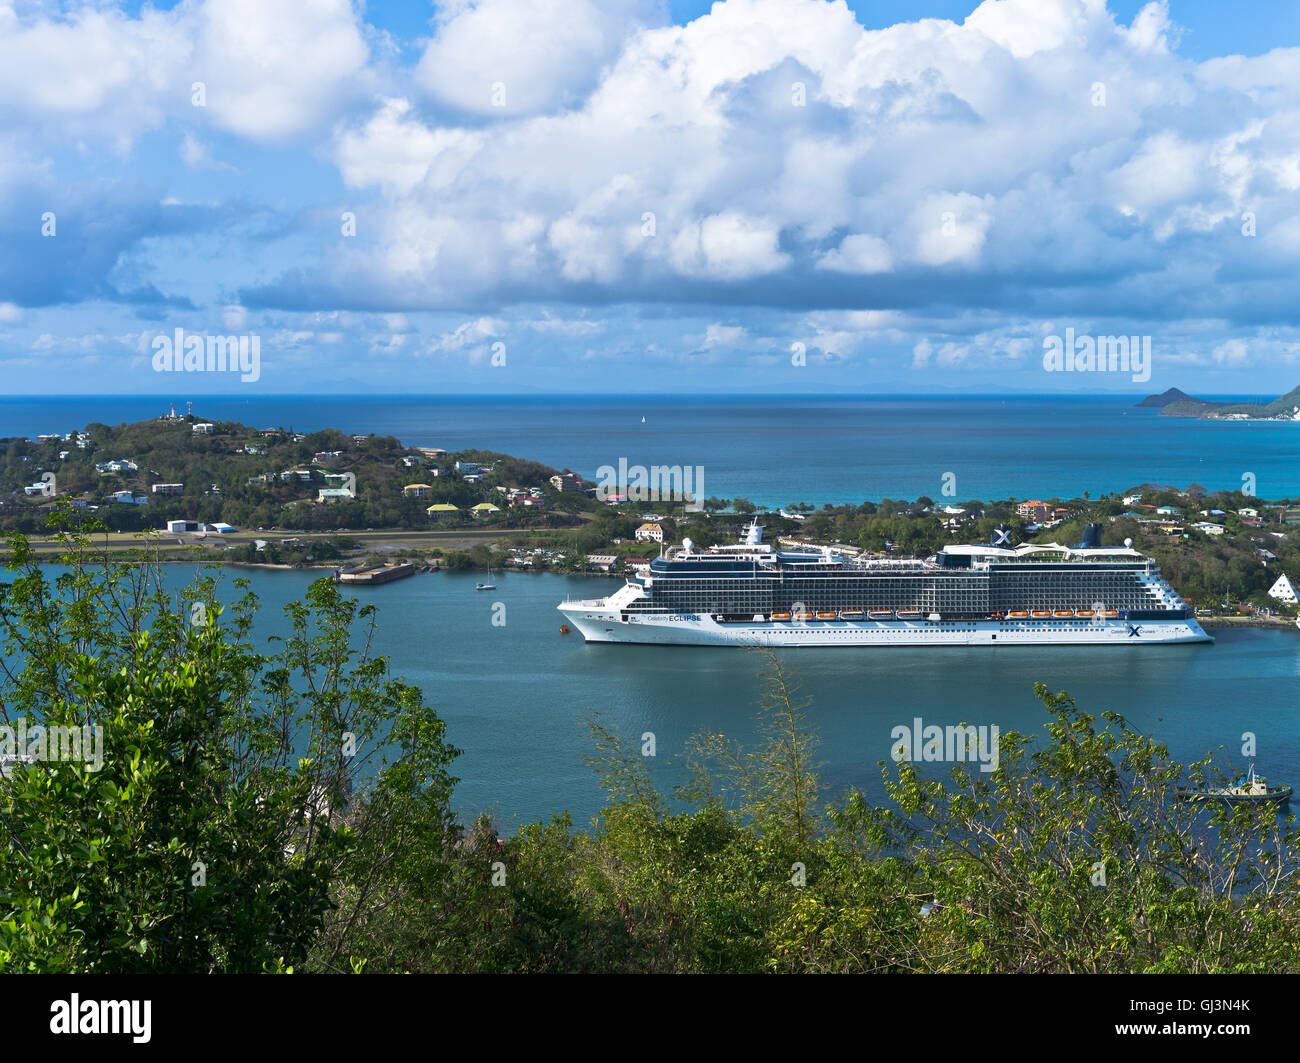 dh Castries ST LUCIA CARIBBEAN Lookout view Celebrity X cruise liner Eclipse in Caribbean harbour Stock Photo